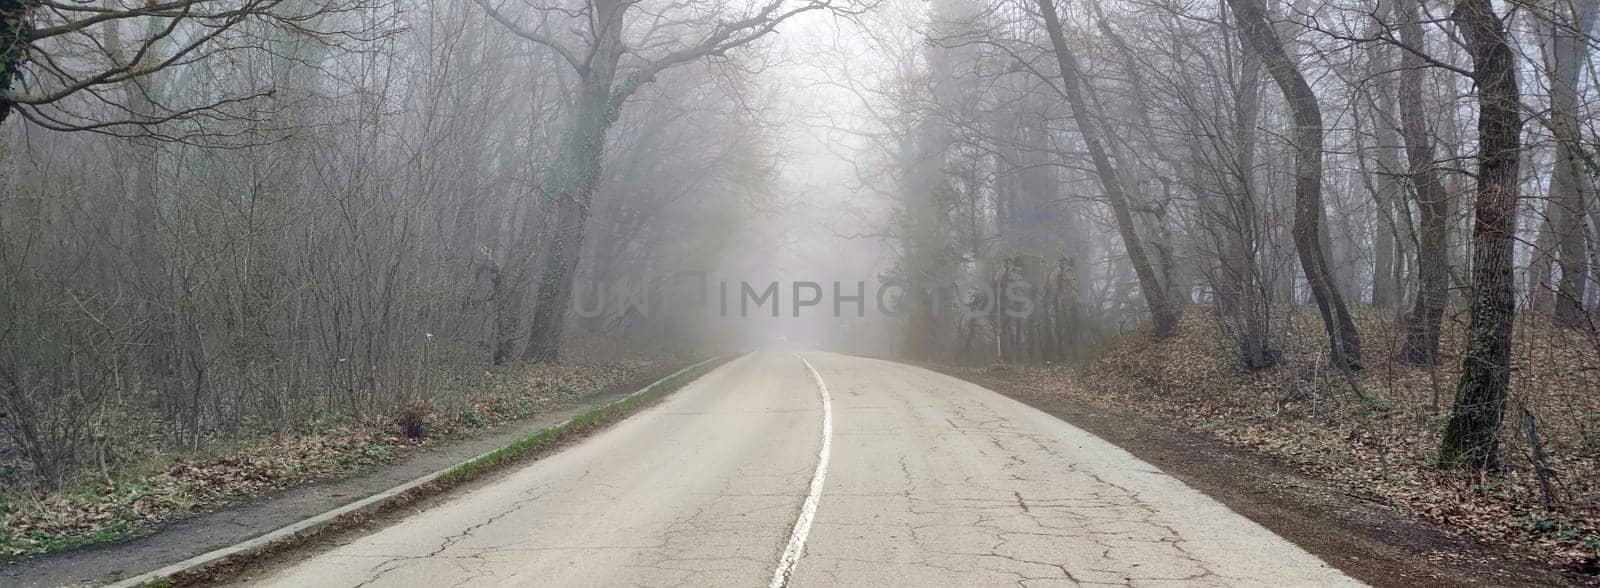 road in the forest in the fog for a horizontal background.